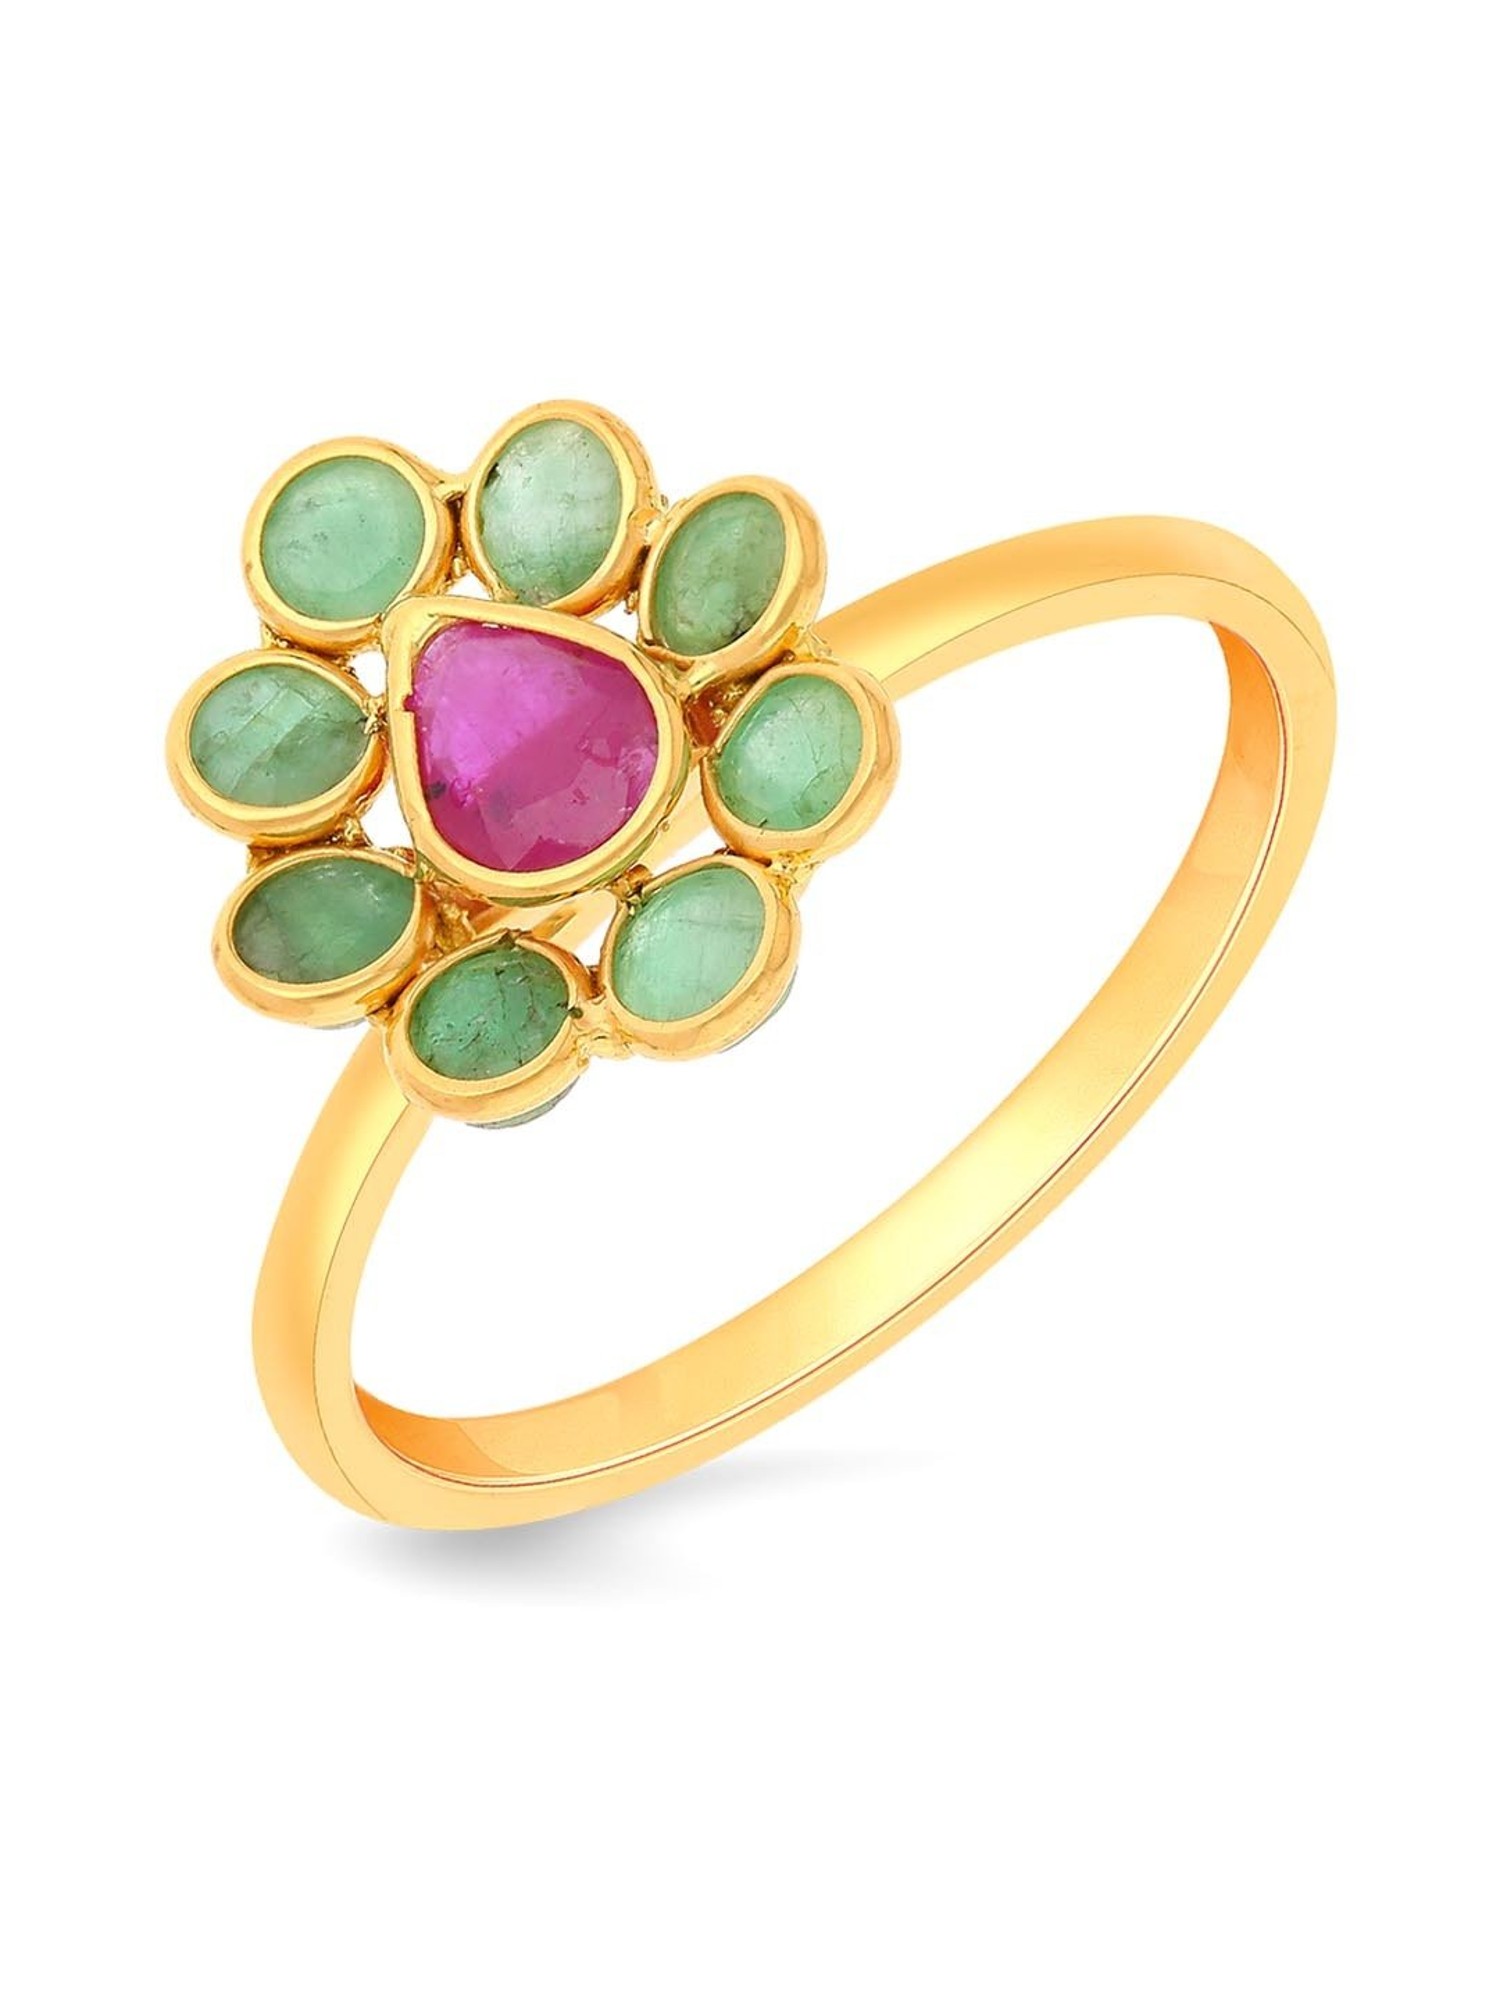 Floral Deluxe Polki and Diamond Ring